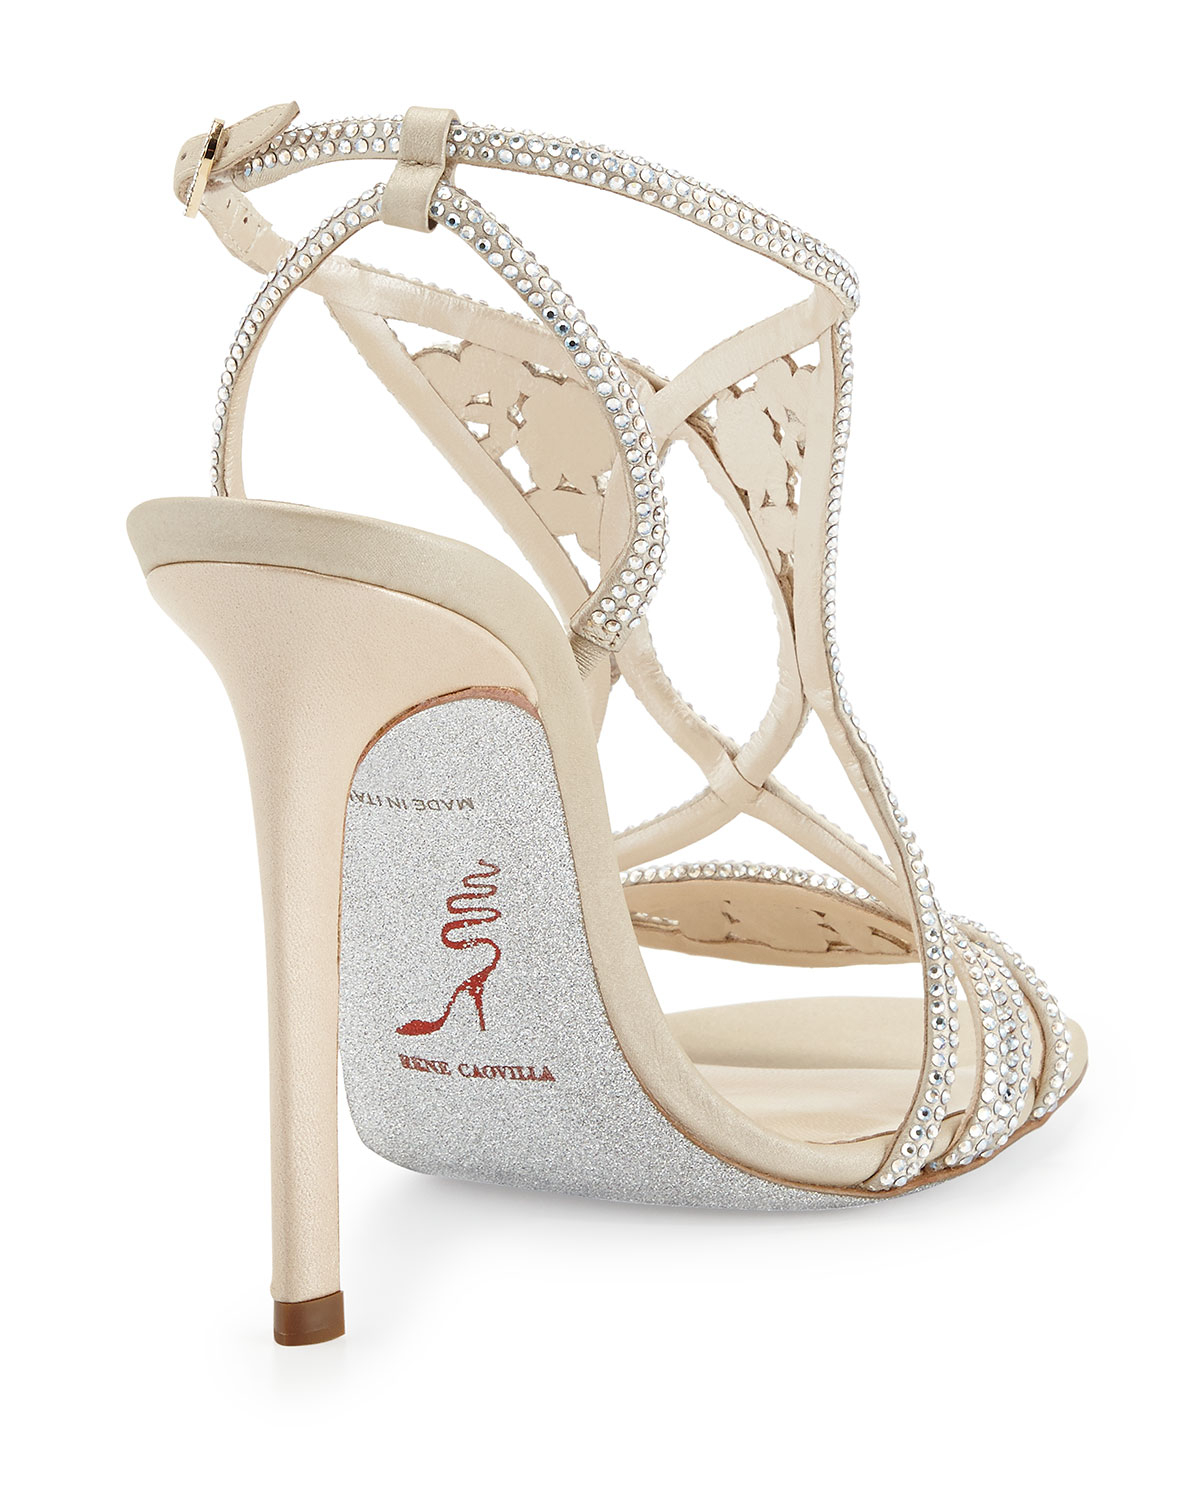 Lyst - Rene Caovilla Crystallized Pearly Satin Sandal in Gray